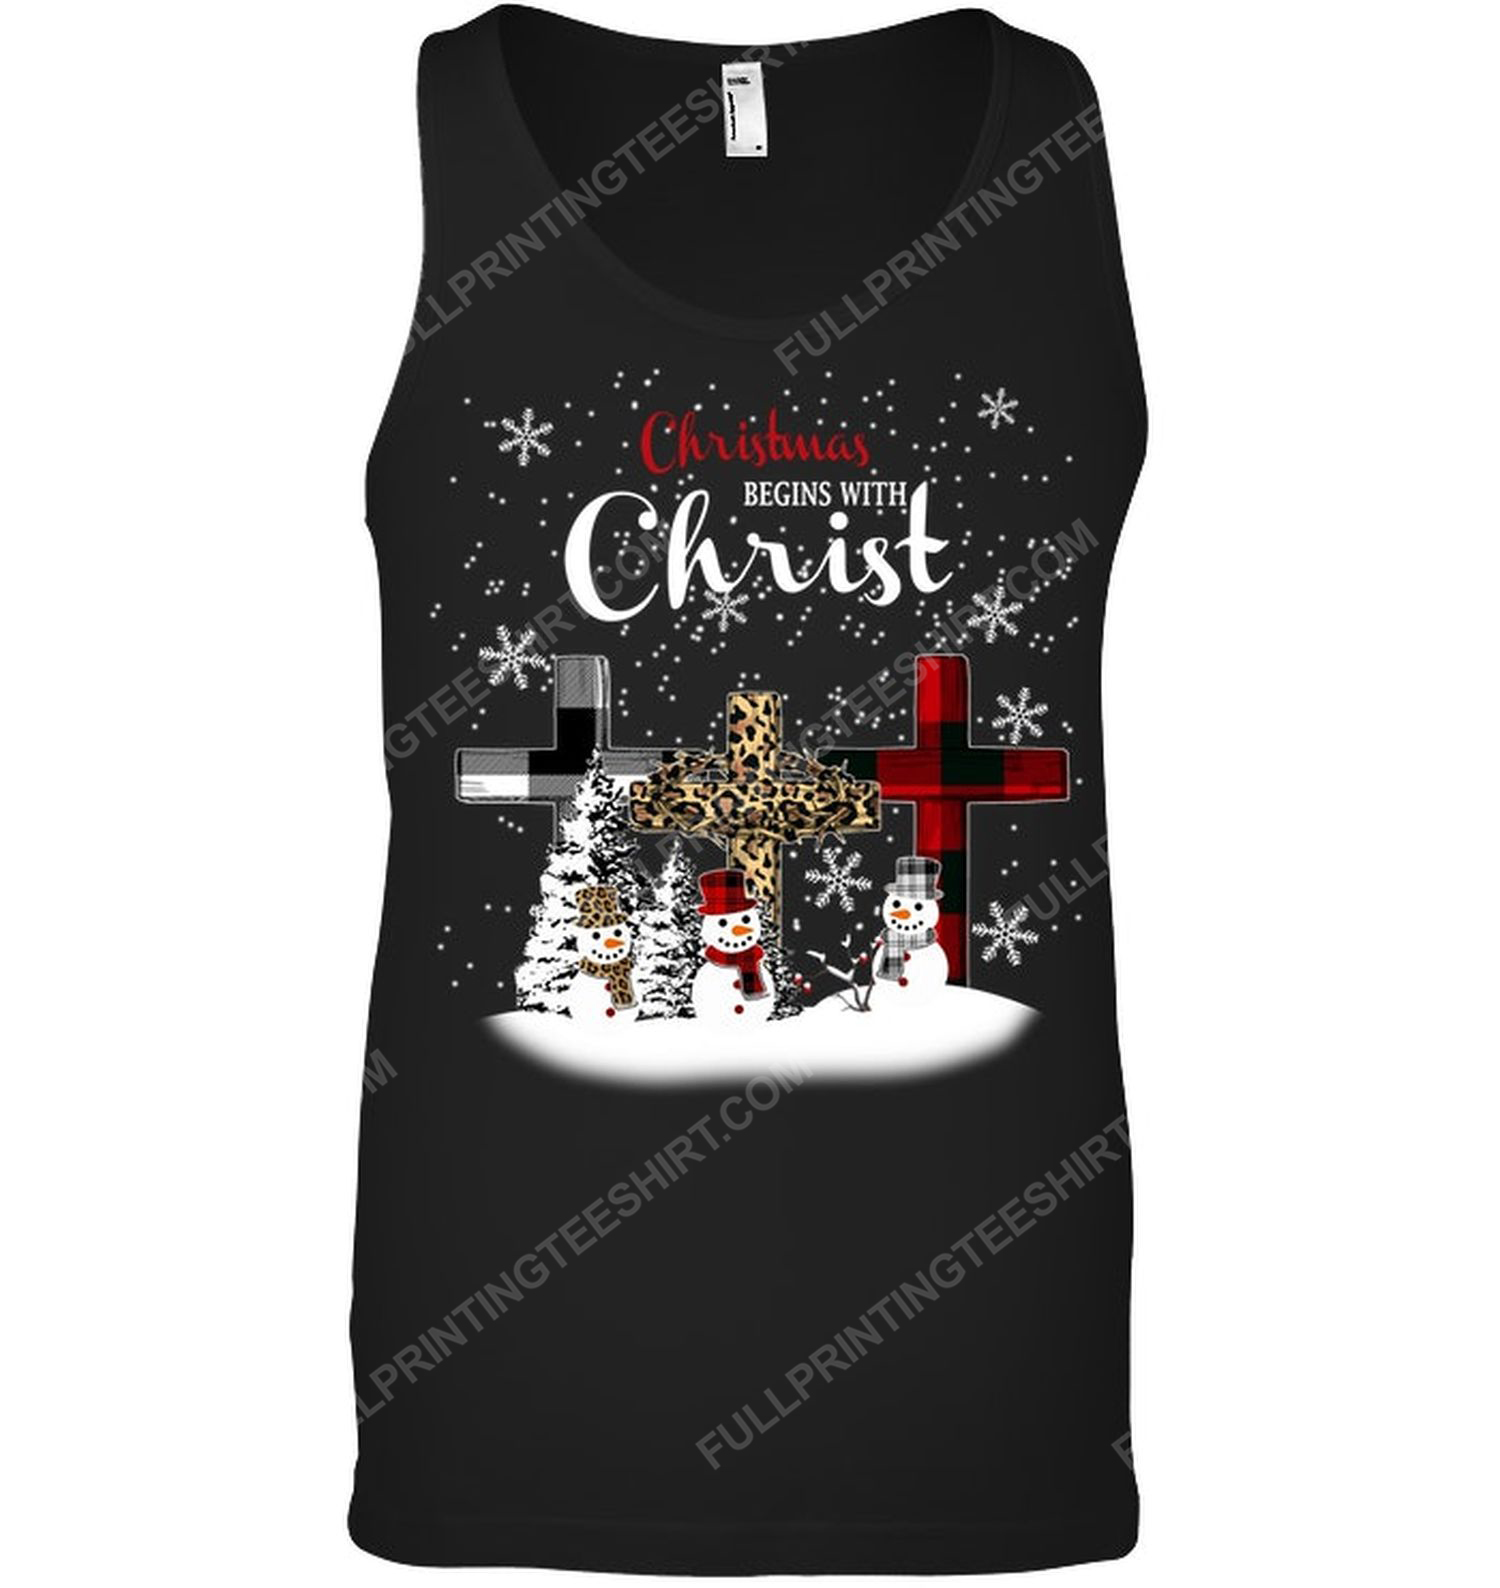 Christmas begins with christ snowman tank top